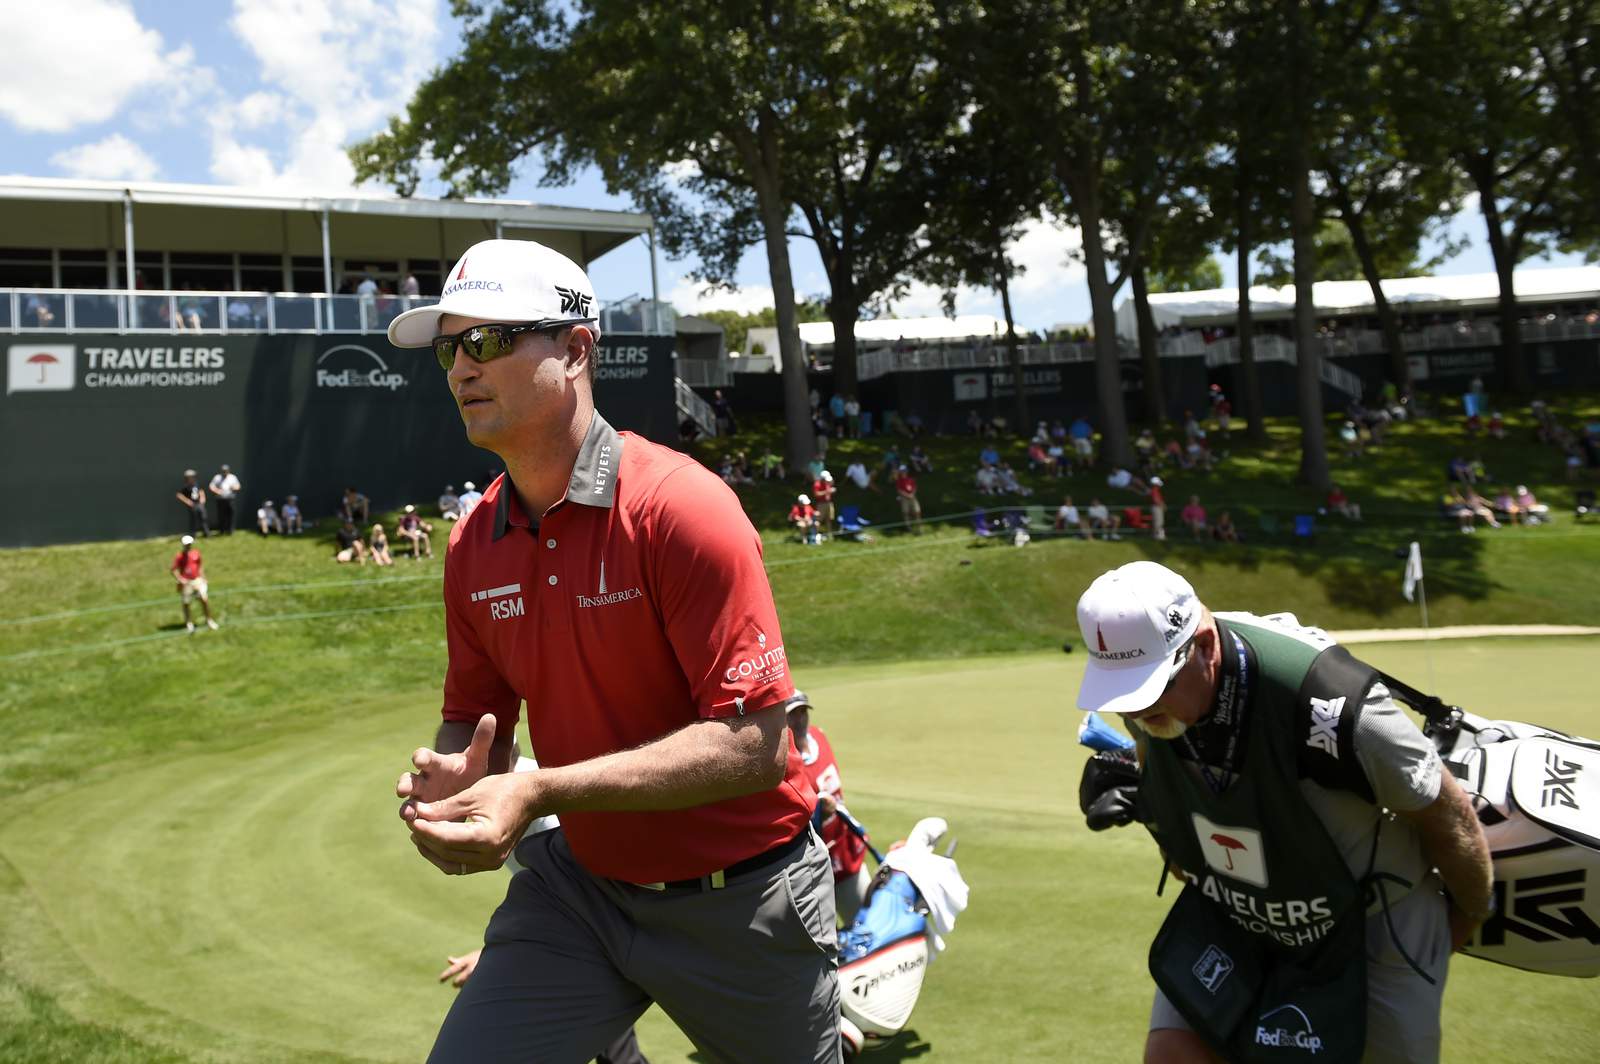 Top field, no fans for this year's Travelers Championship